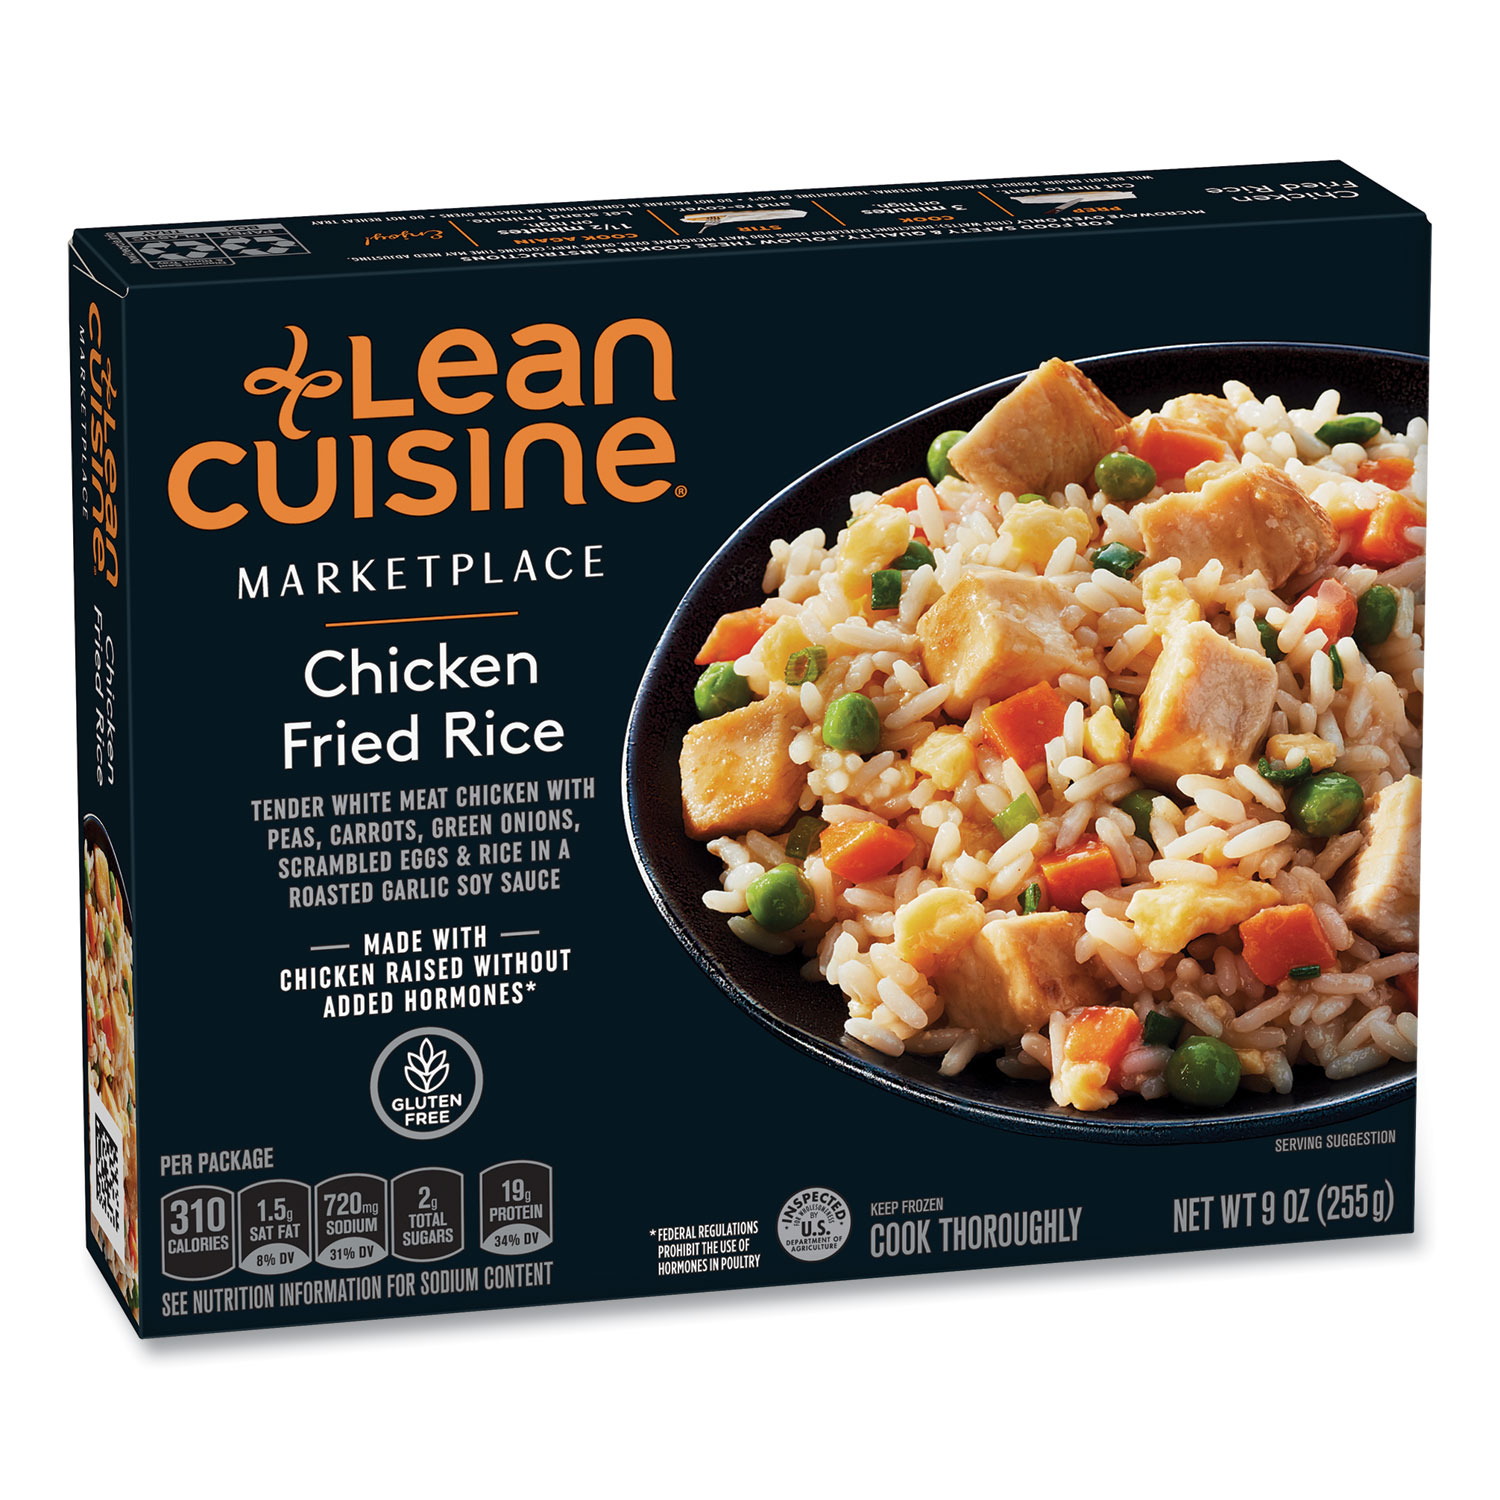  Lean Cuisine 552402 Marketplace Chicken Fried Rice, 9 oz Box, 3 Boxes/Pack, Free Delivery in 1-4 Business Days (GRR90300123) 